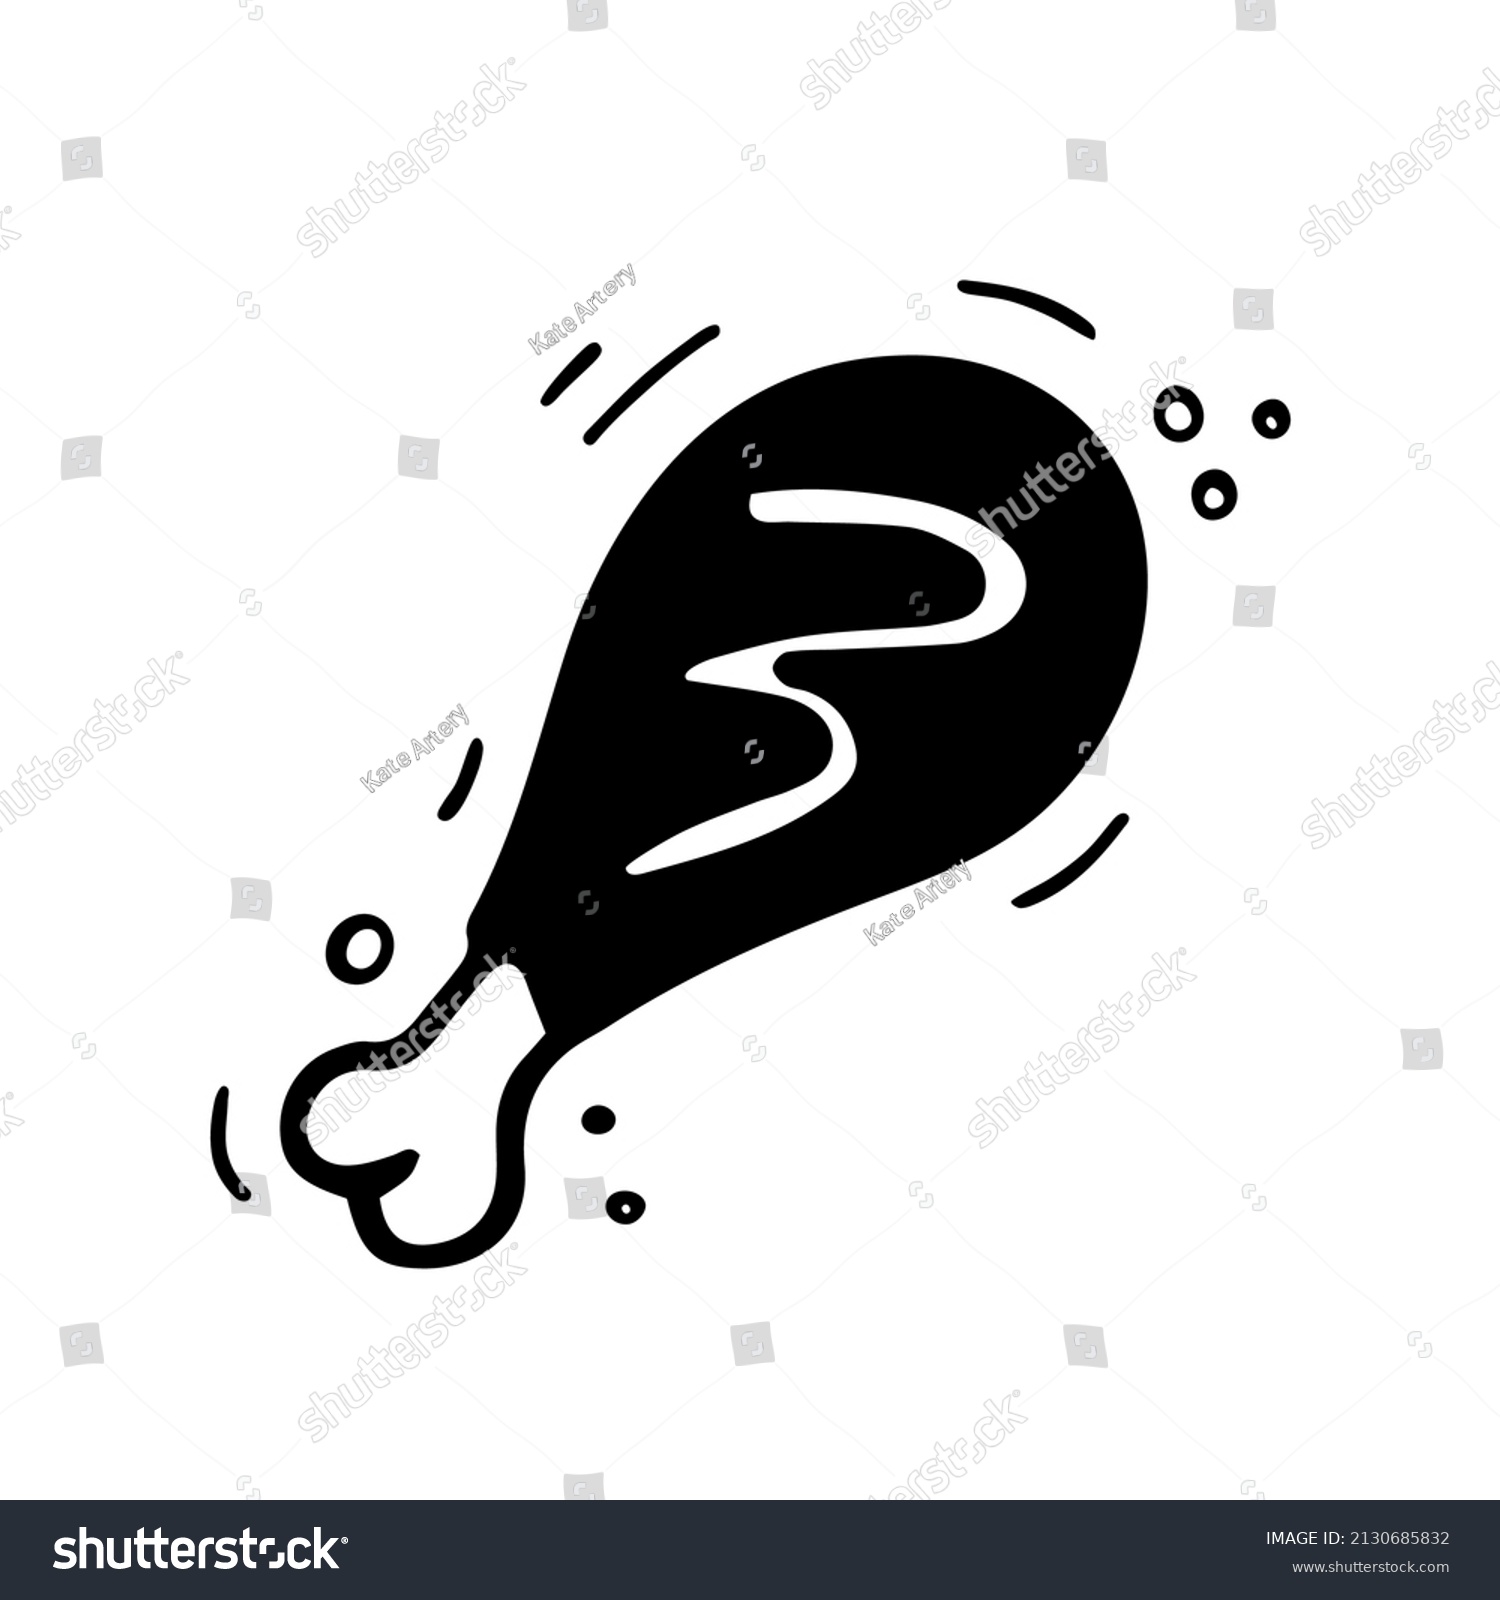 SVG of Hand drawn chicken's leg. Sketch of chick leg. Fast food illustration in doodle style. svg